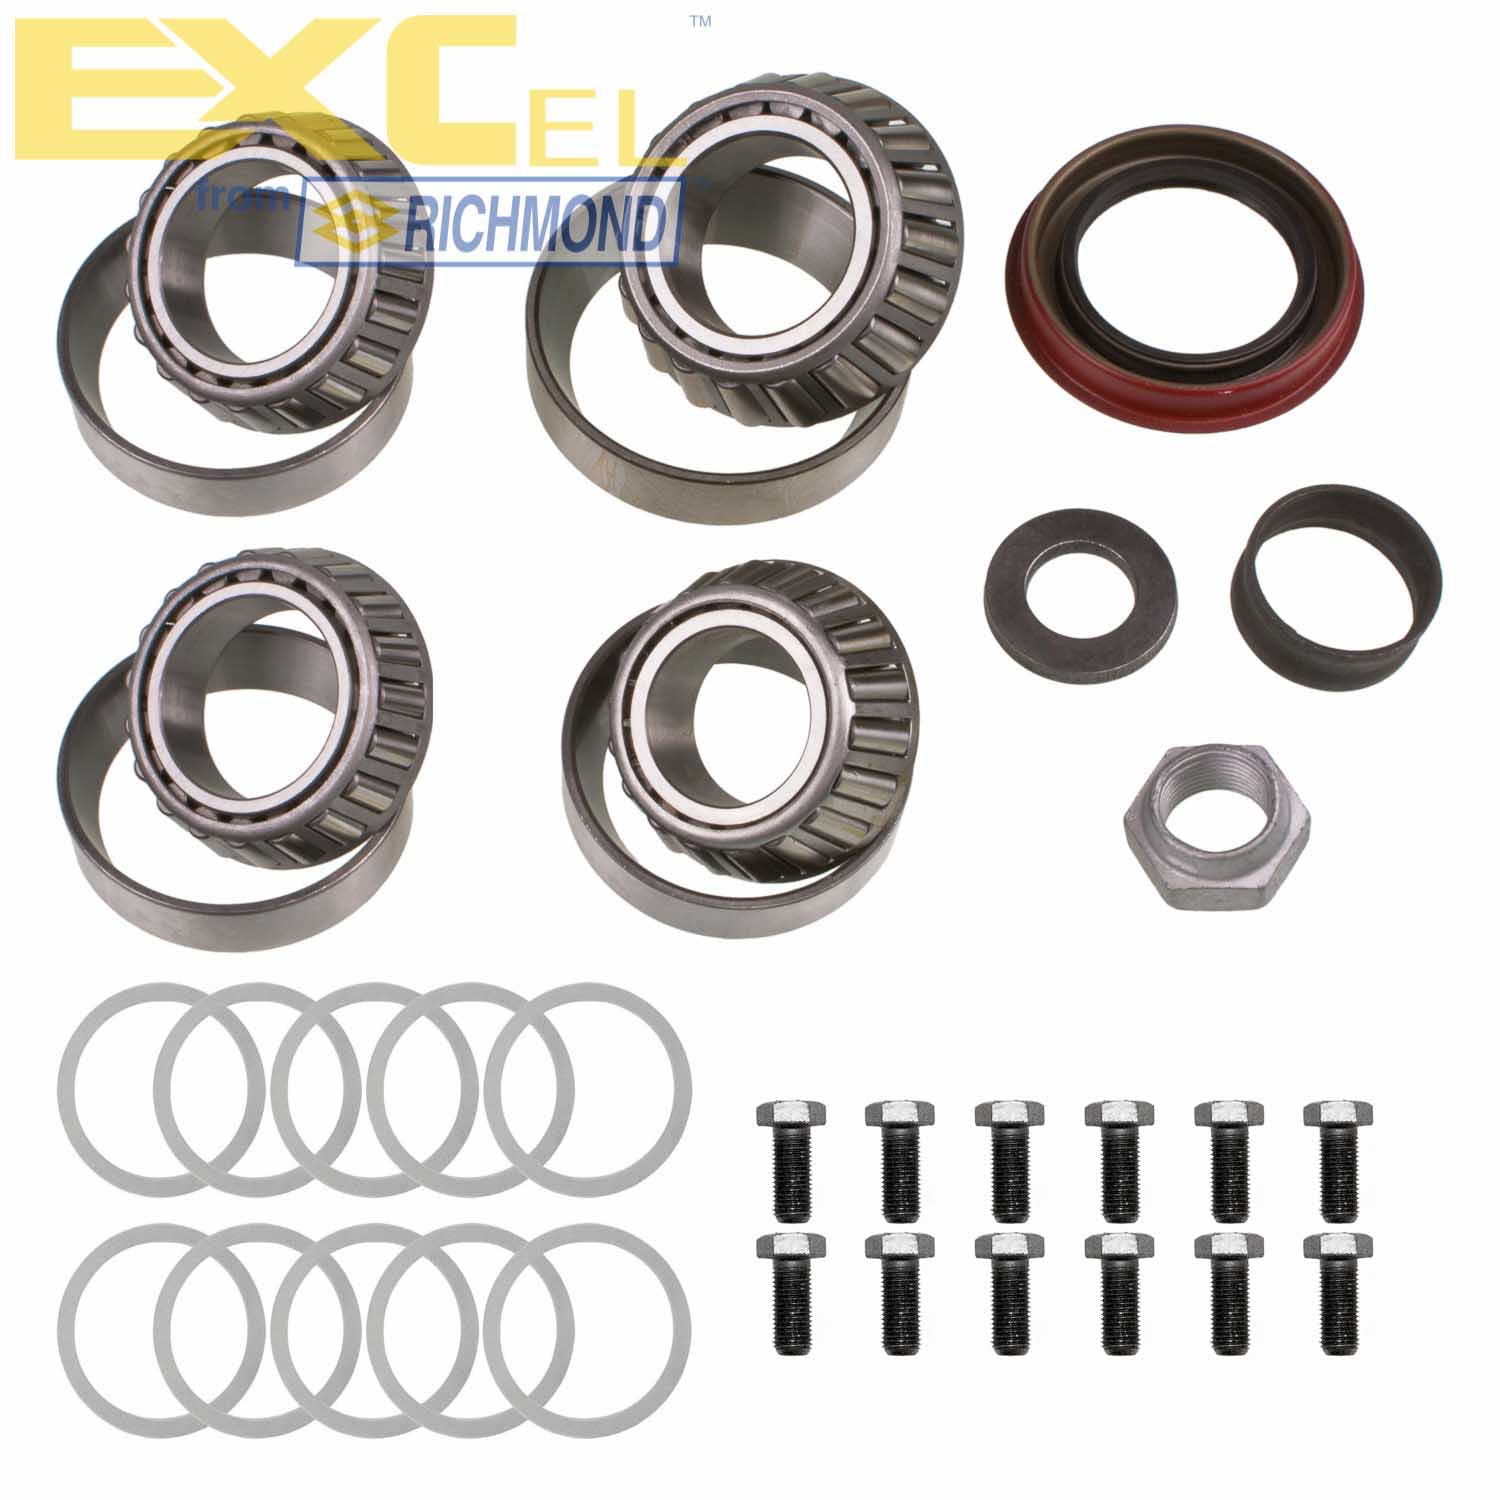 Excel XL-1020-1 Differential Bearing Kit